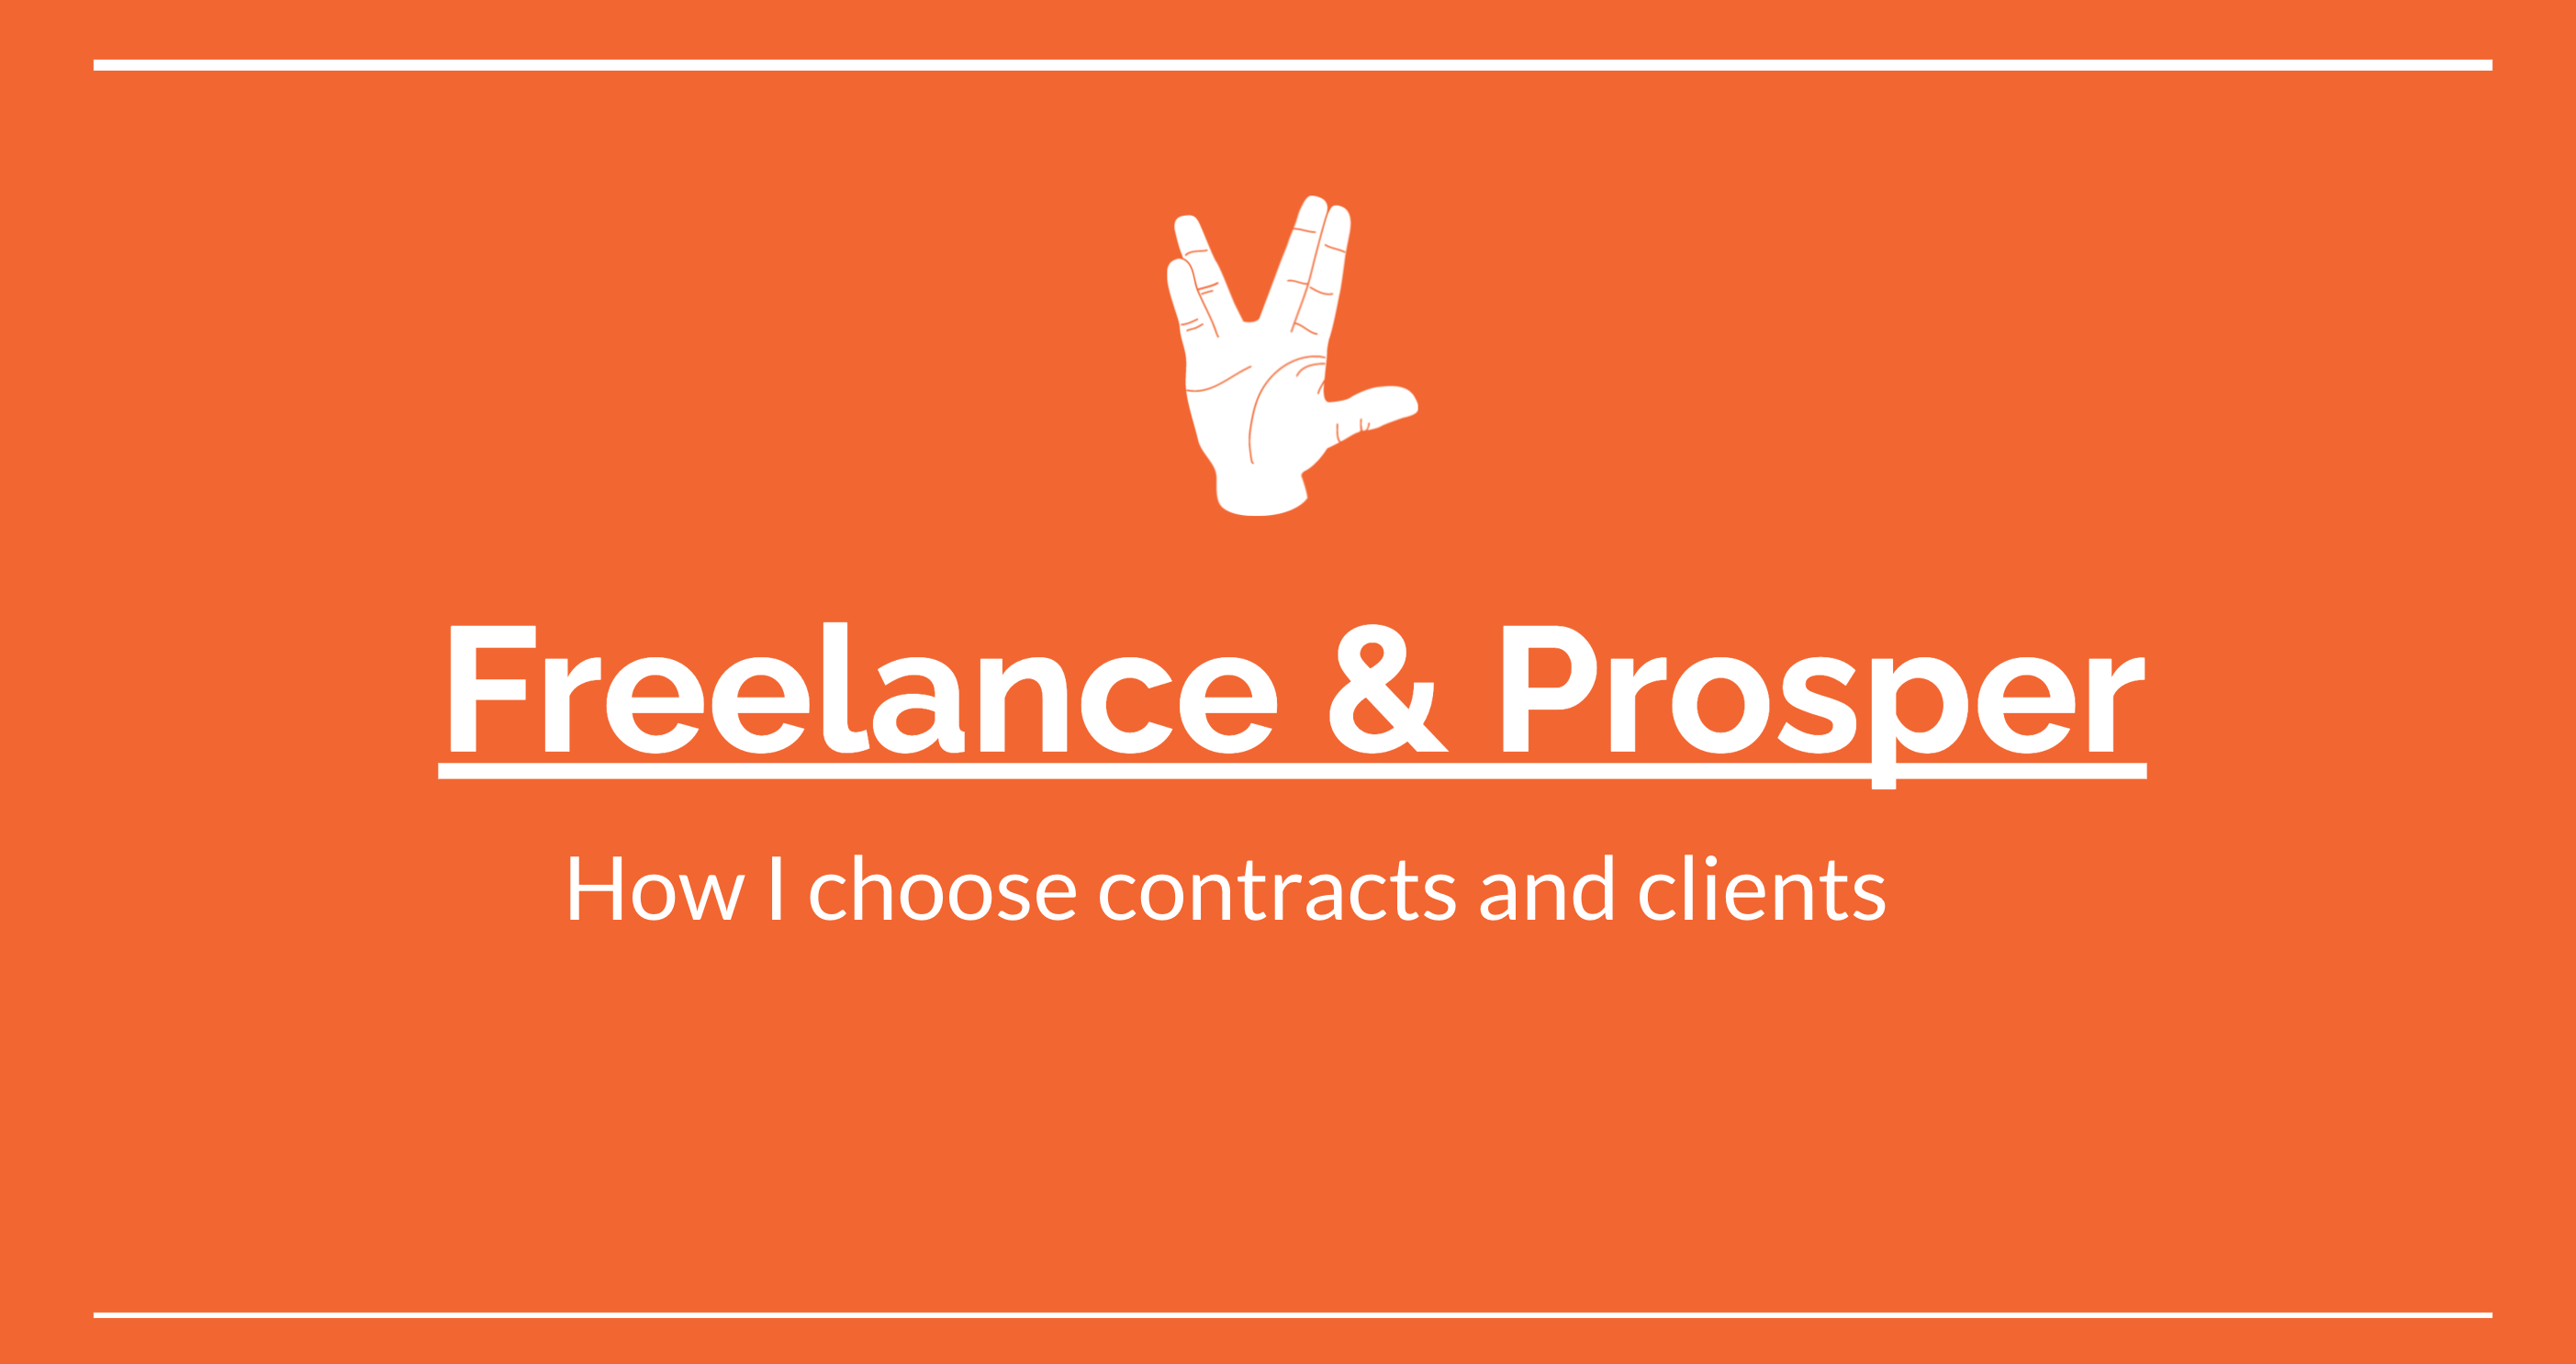 How I choose contracts and clients